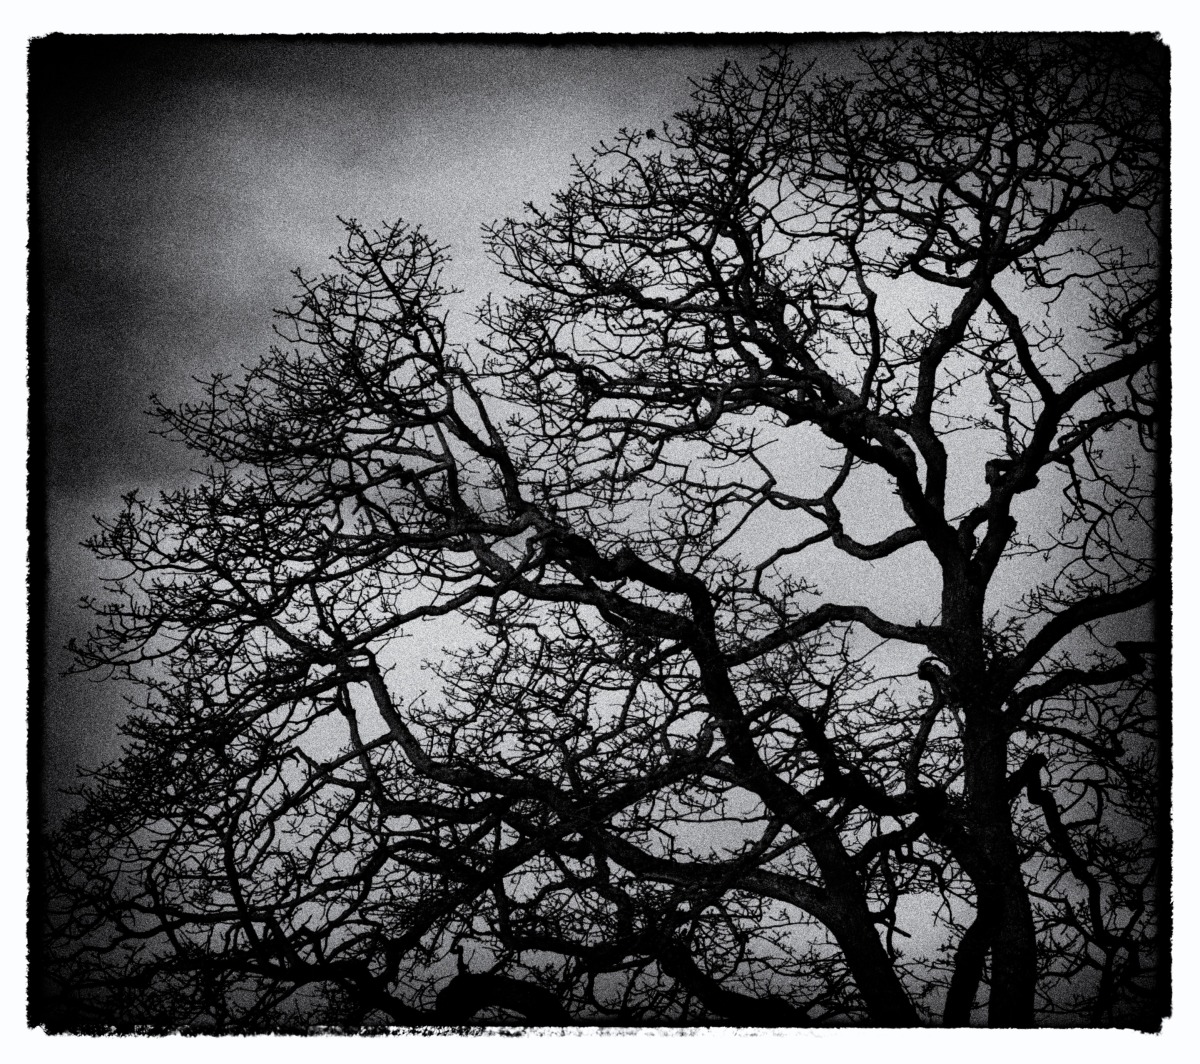 2012-02-05 at 08-51-14 bare branches looking up scarey threatening trees winter.jpg